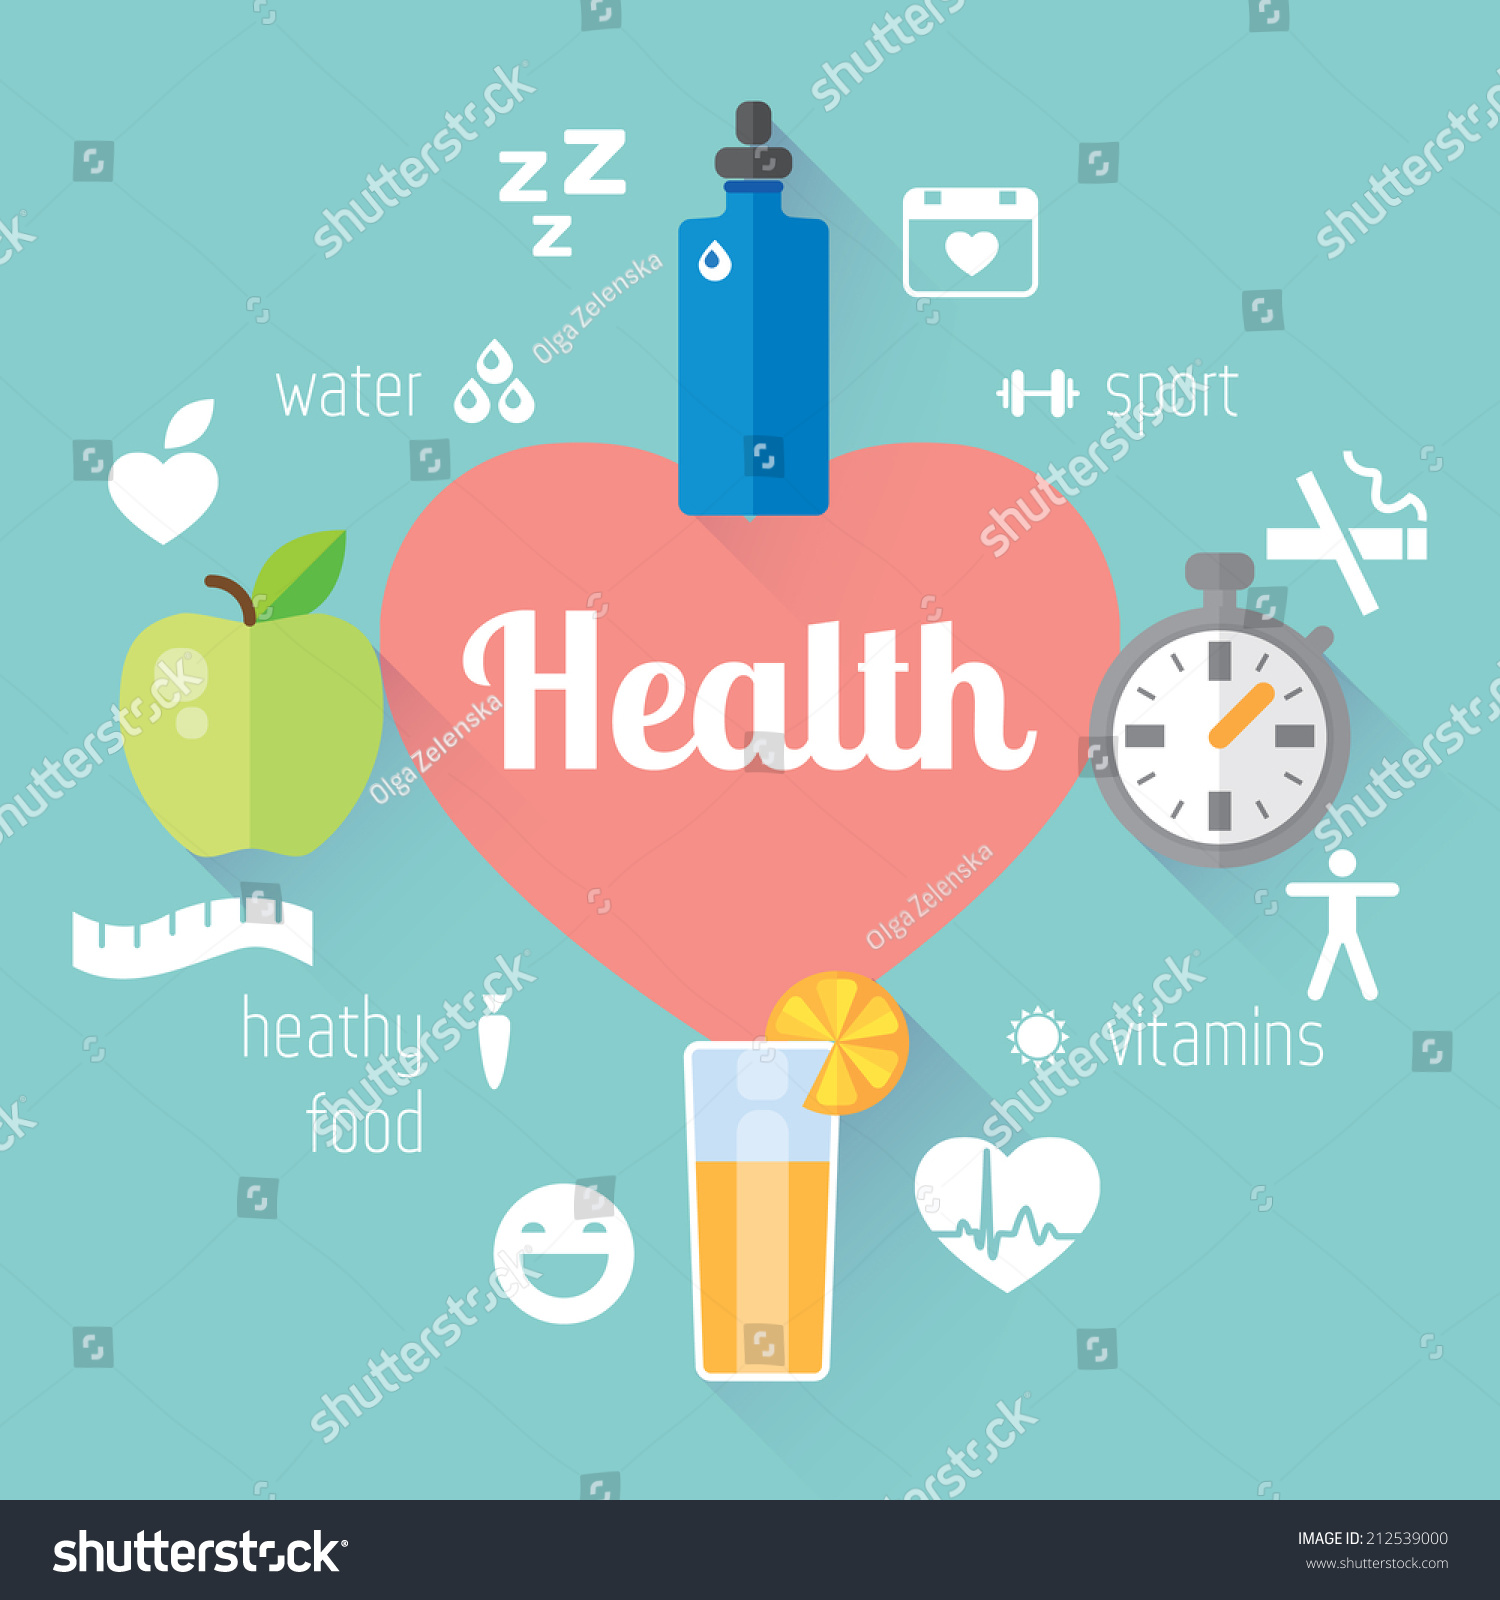 stock-vector-health-and-sport-lifestyle-illustration-and-info-graphic-vector-modern-flat-design-element-212539000.jpg